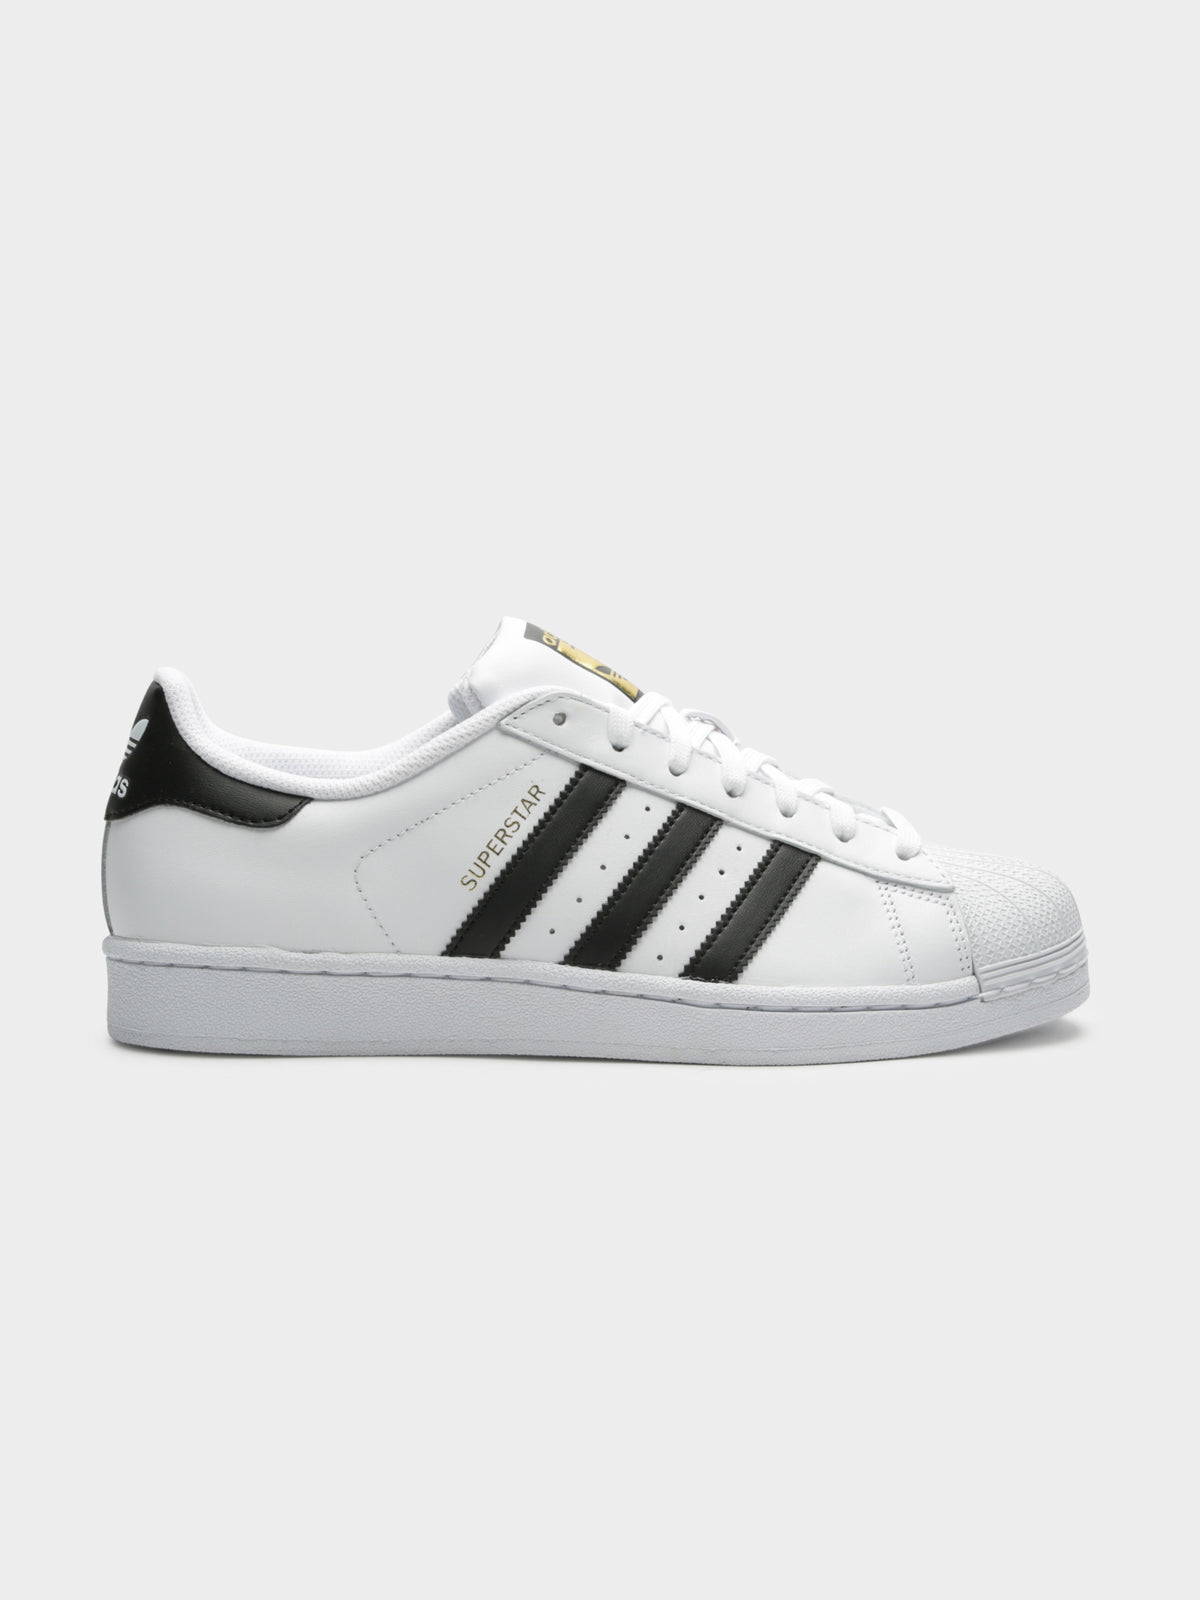 Unisex Superstar Sneakers in White and Black